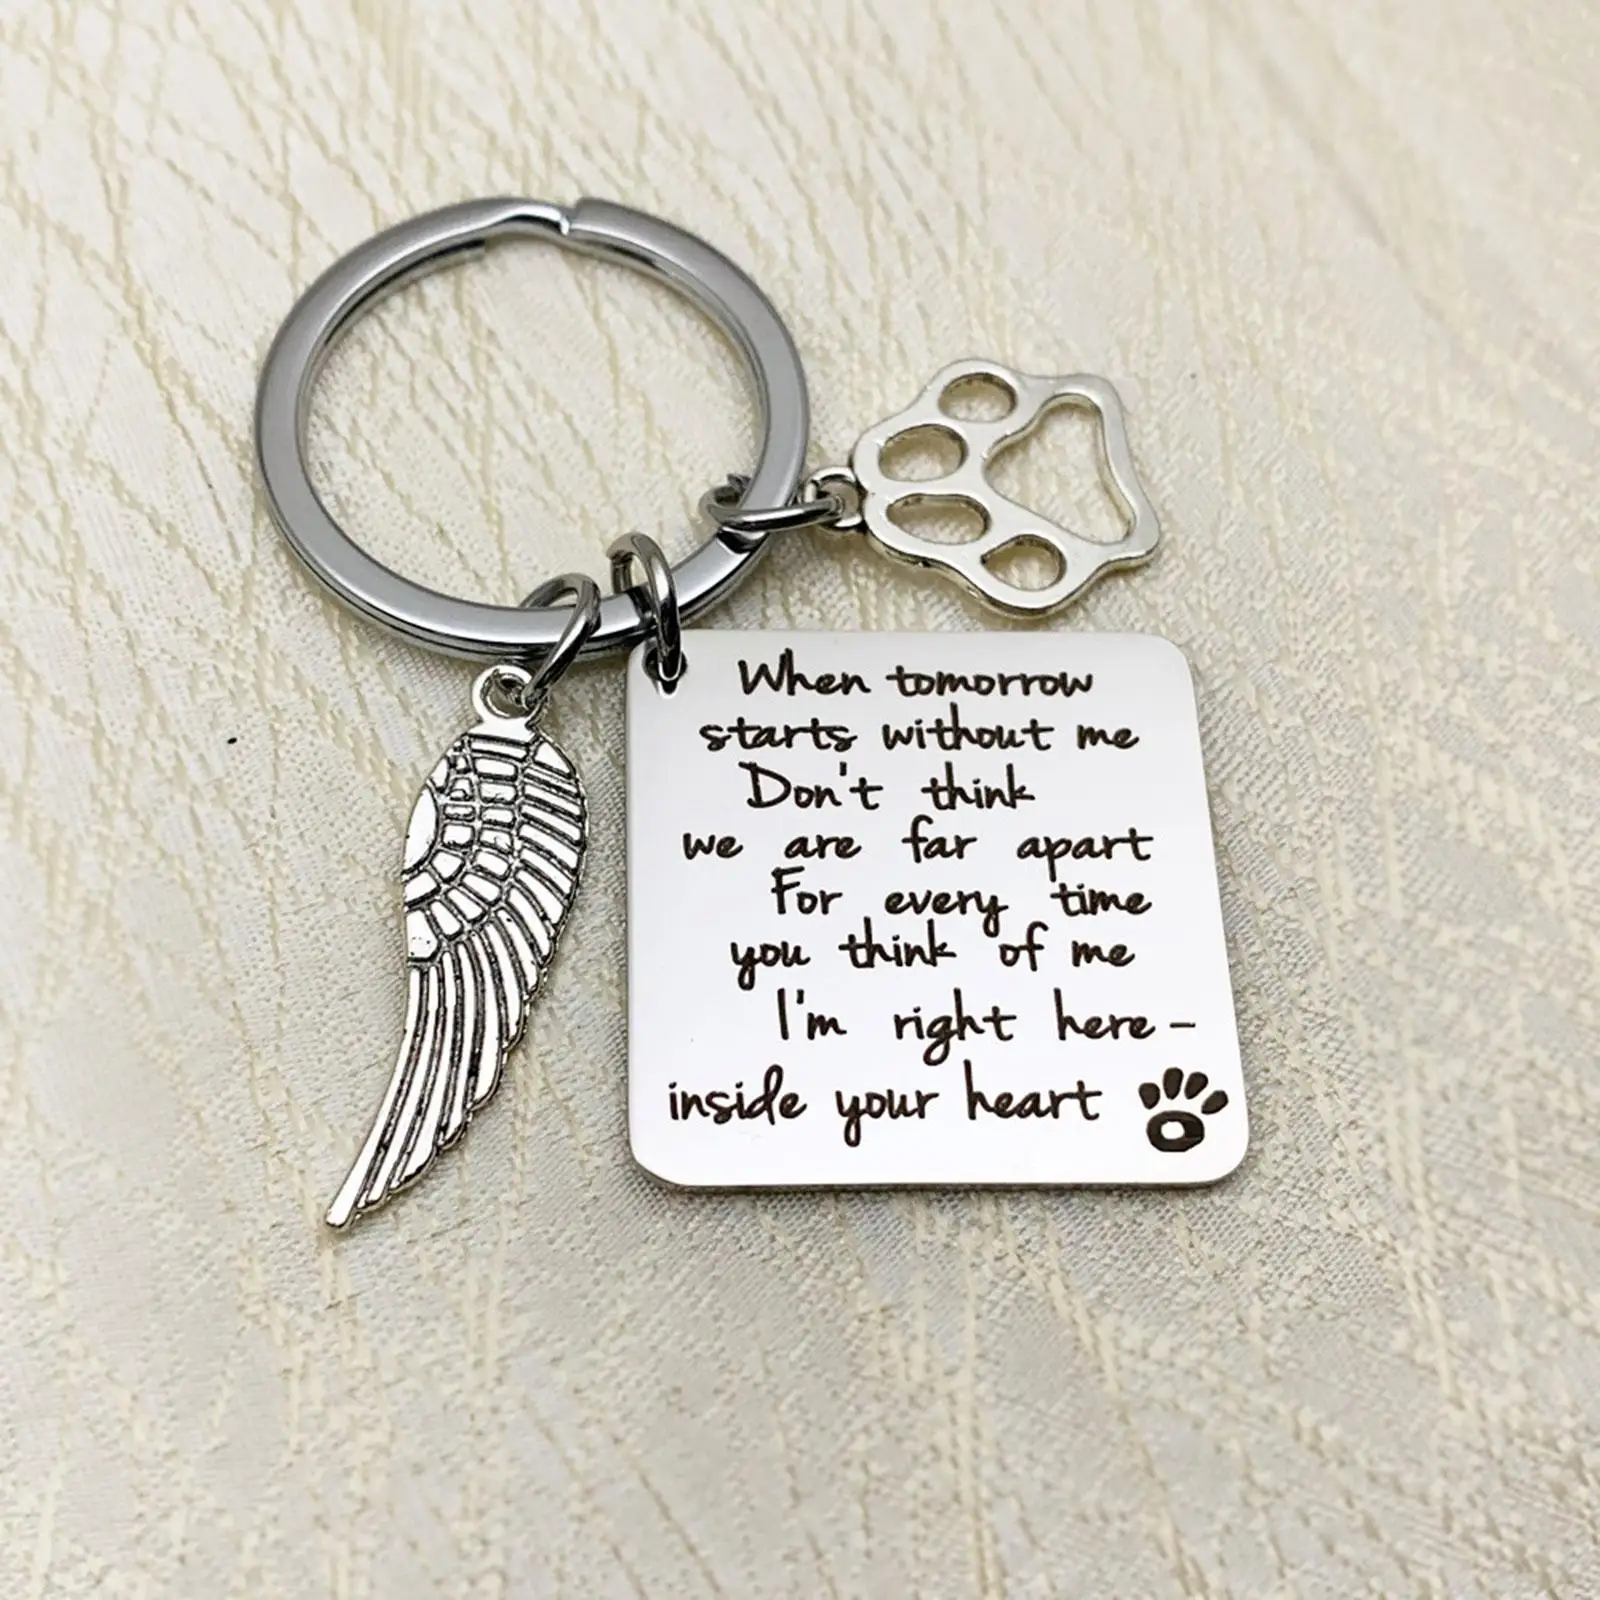 Pet Memorial Gifts Keychain for Dog Cat Pet Keychains Dog Cat Loss Gifts Keepsake Key Chain Loss of Dog Sympathy Gift